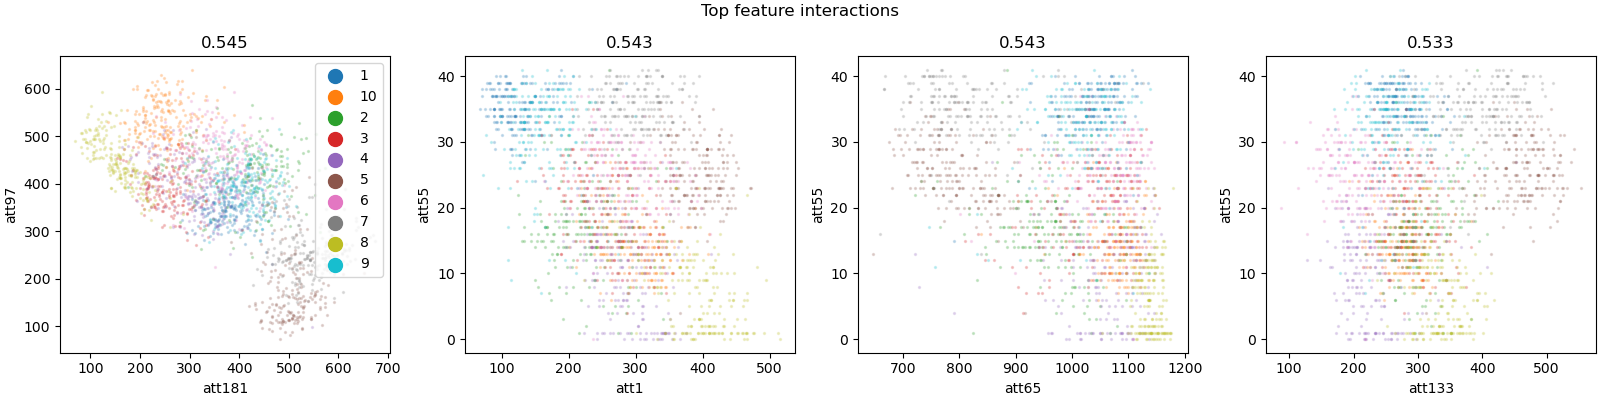 Top feature interactions, 0.545, 0.543, 0.543, 0.533